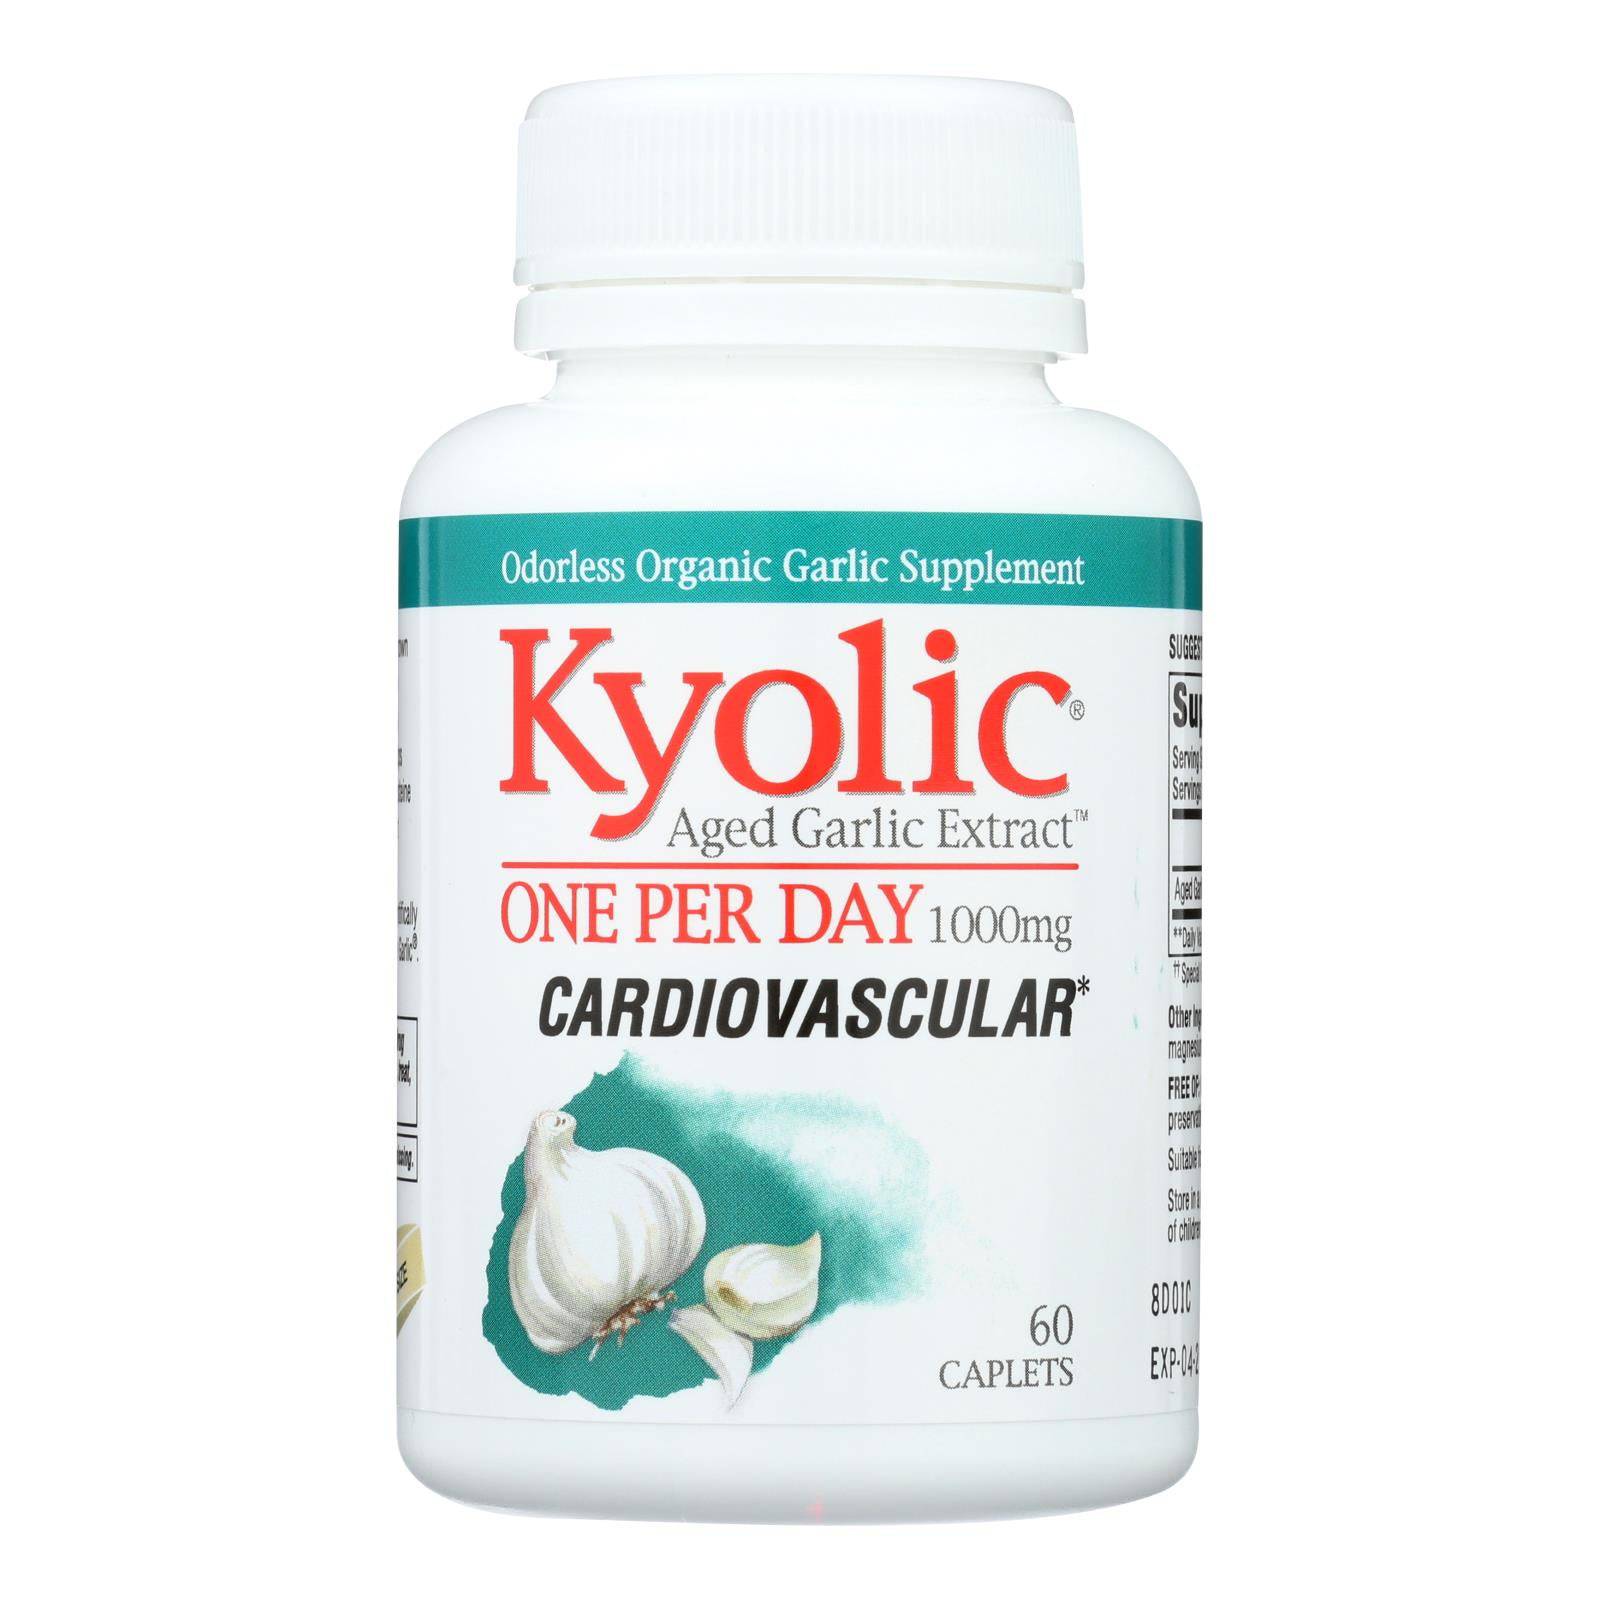 Buy Kyolic - Aged Garlic Extract One Per Day Cardiovascular - 1000 Mg - 60 Caplets  at OnlyNaturals.us